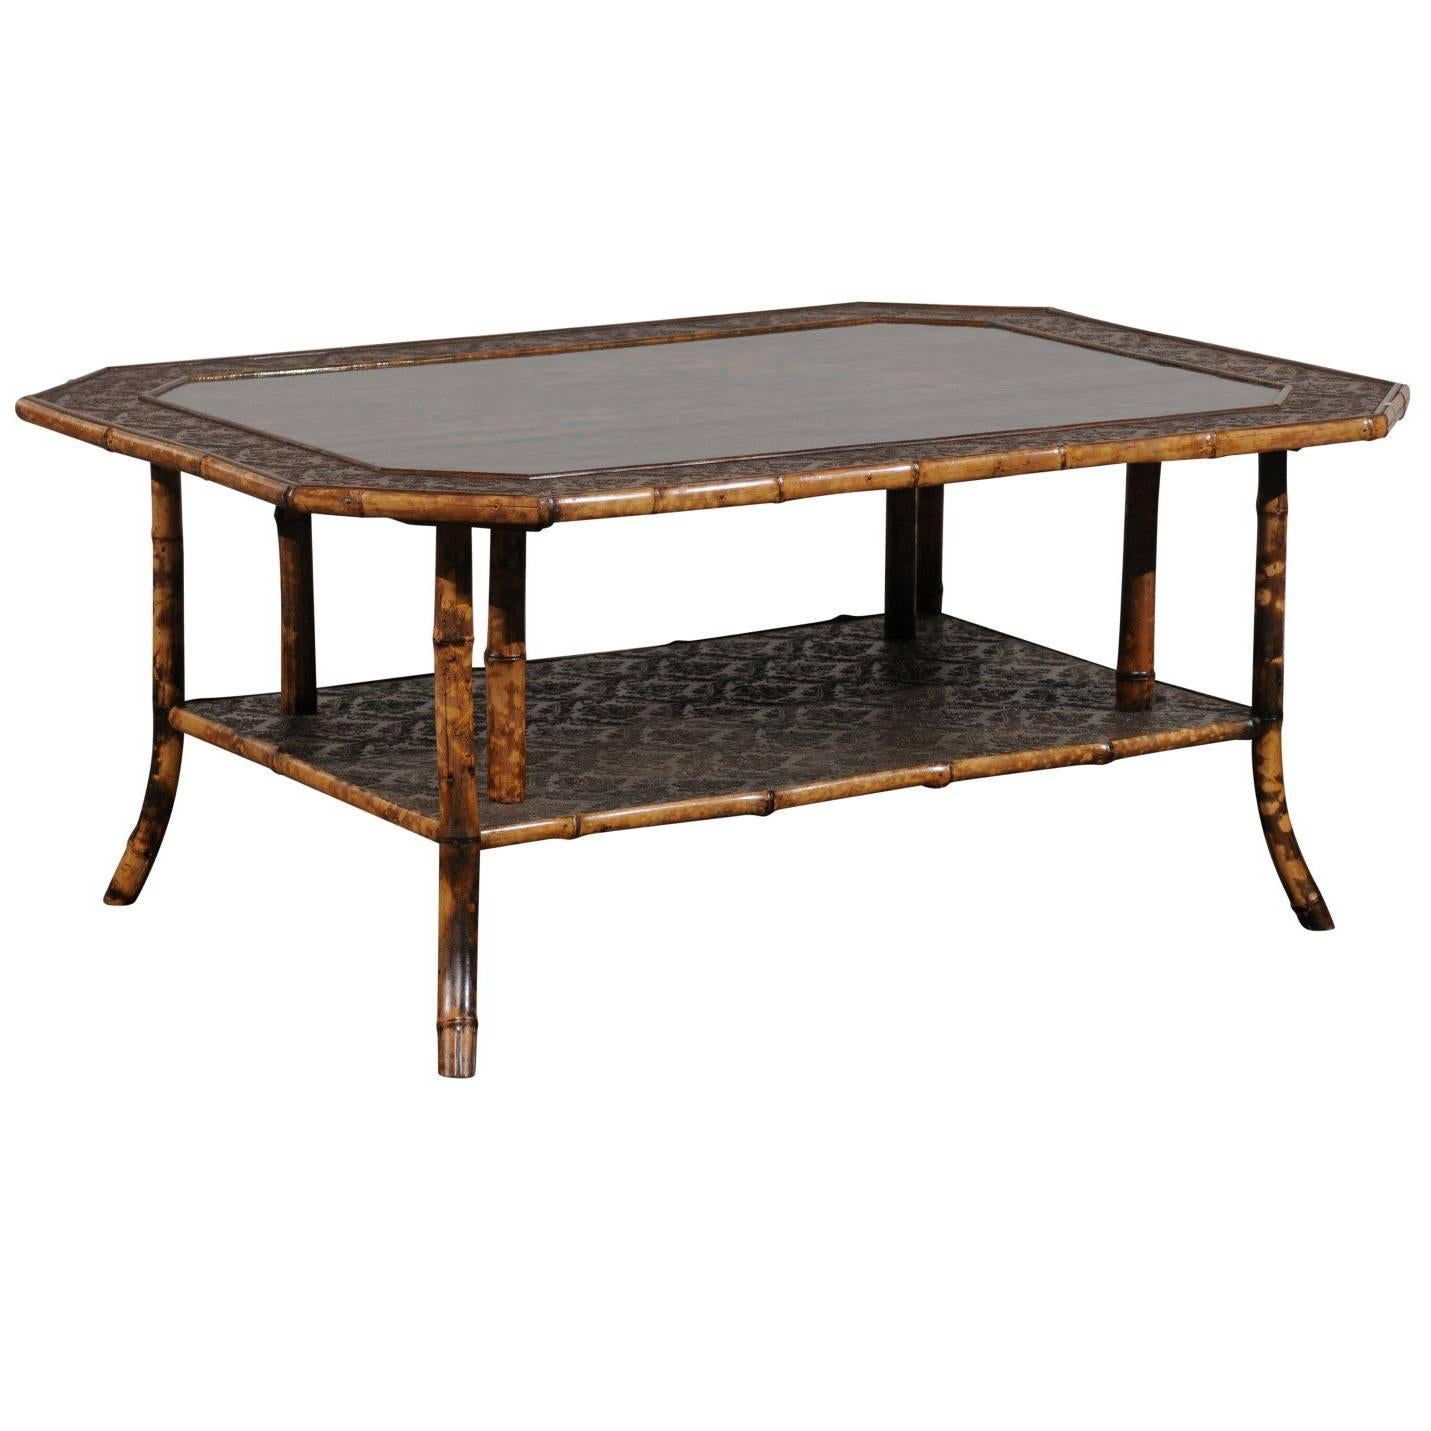 20th Century Two-Tier Coffee Table, circa 1900